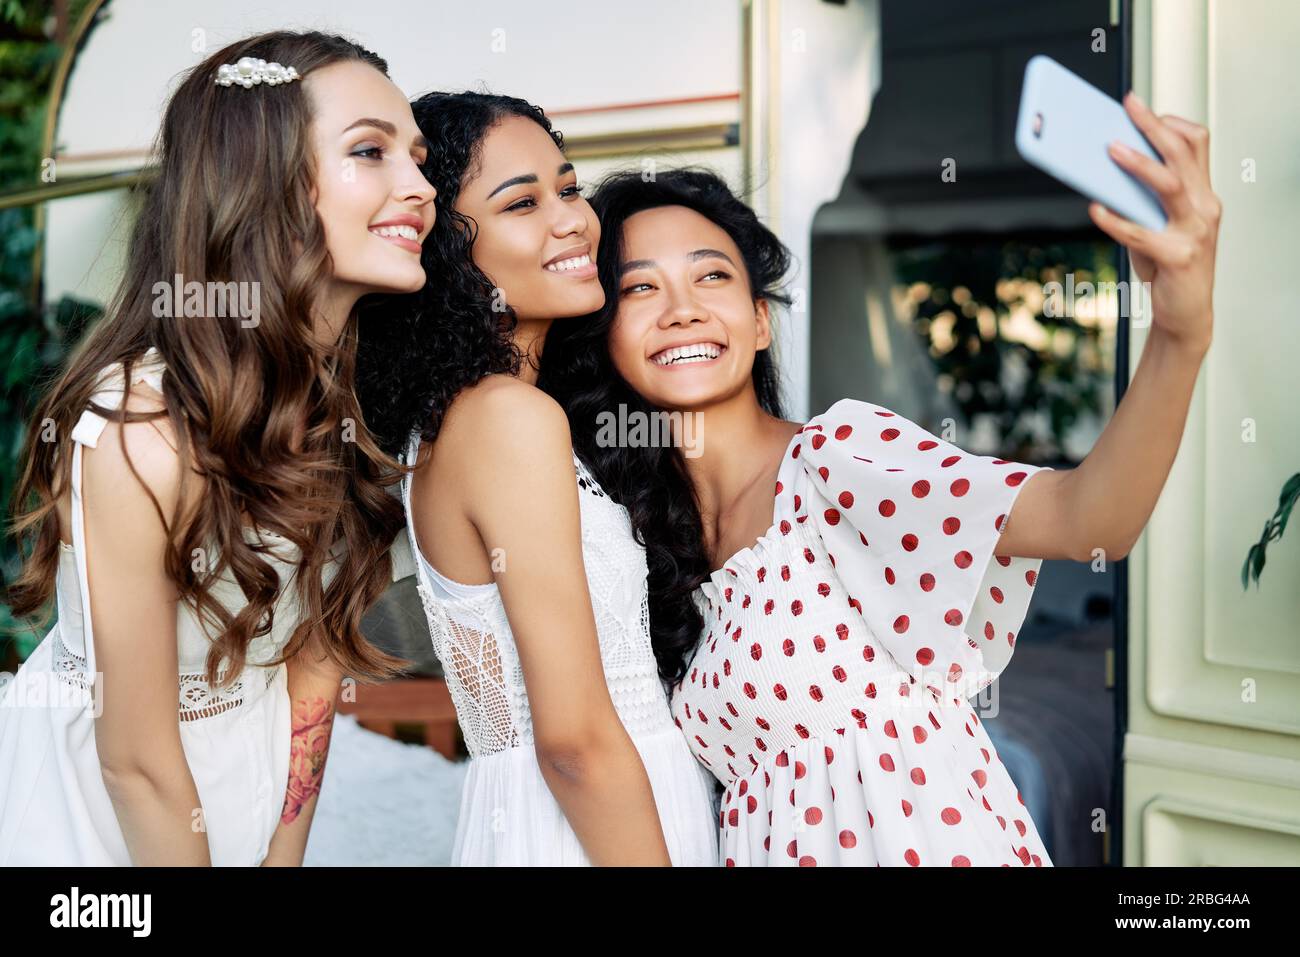 Beautiful smiling women taking selfie with mobile phone. Multi ethnic girls caucasian, african american and asian females making self portrait during Stock Photo